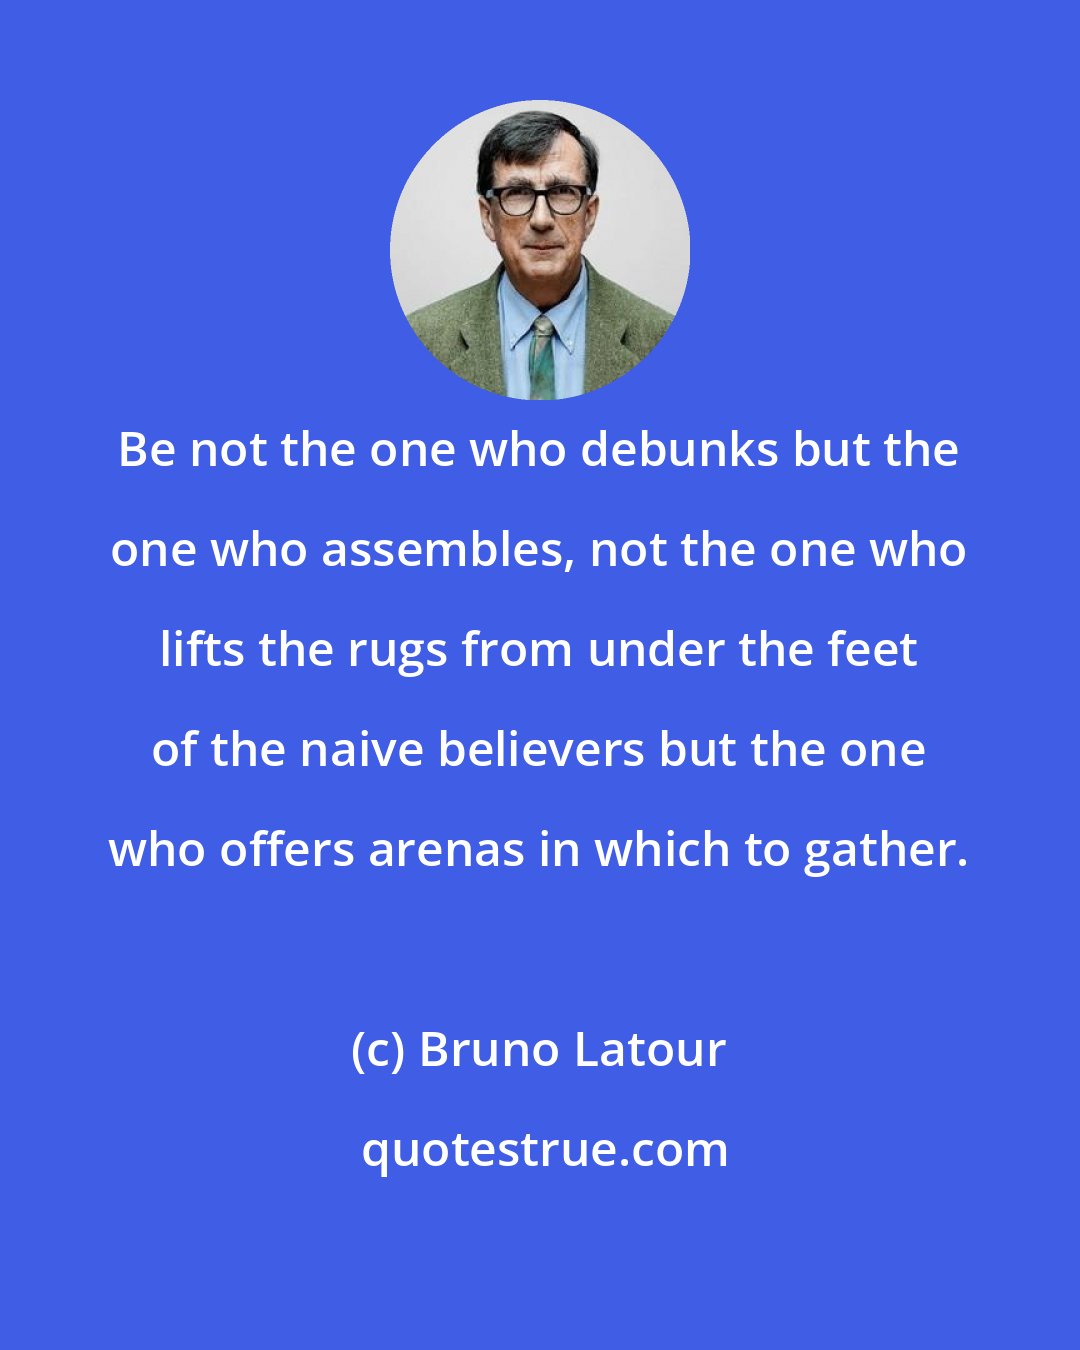 Bruno Latour: Be not the one who debunks but the one who assembles, not the one who lifts the rugs from under the feet of the naive believers but the one who offers arenas in which to gather.